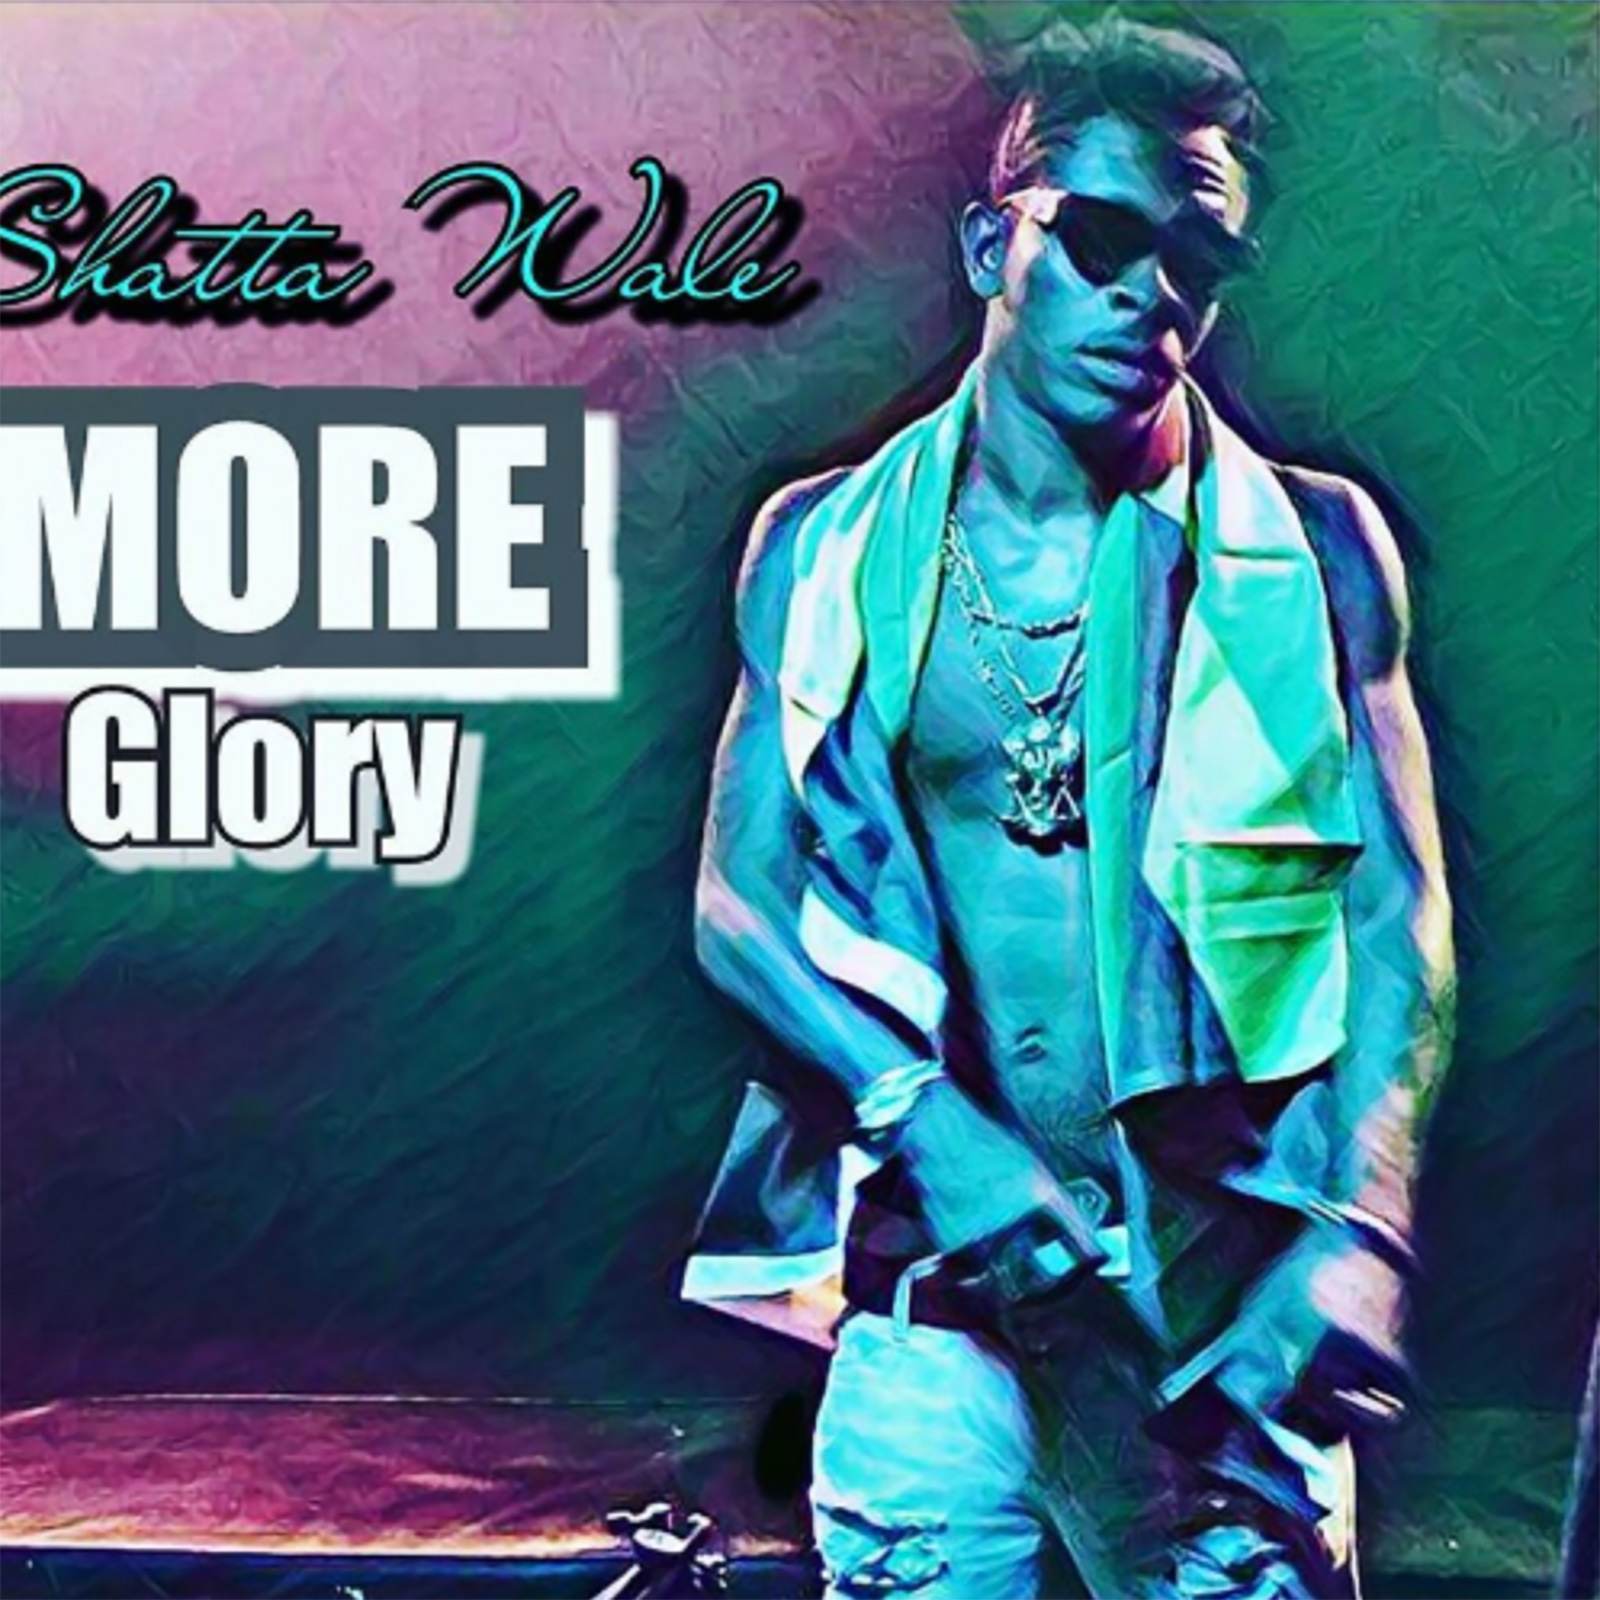 More Glory by Shatta Wale